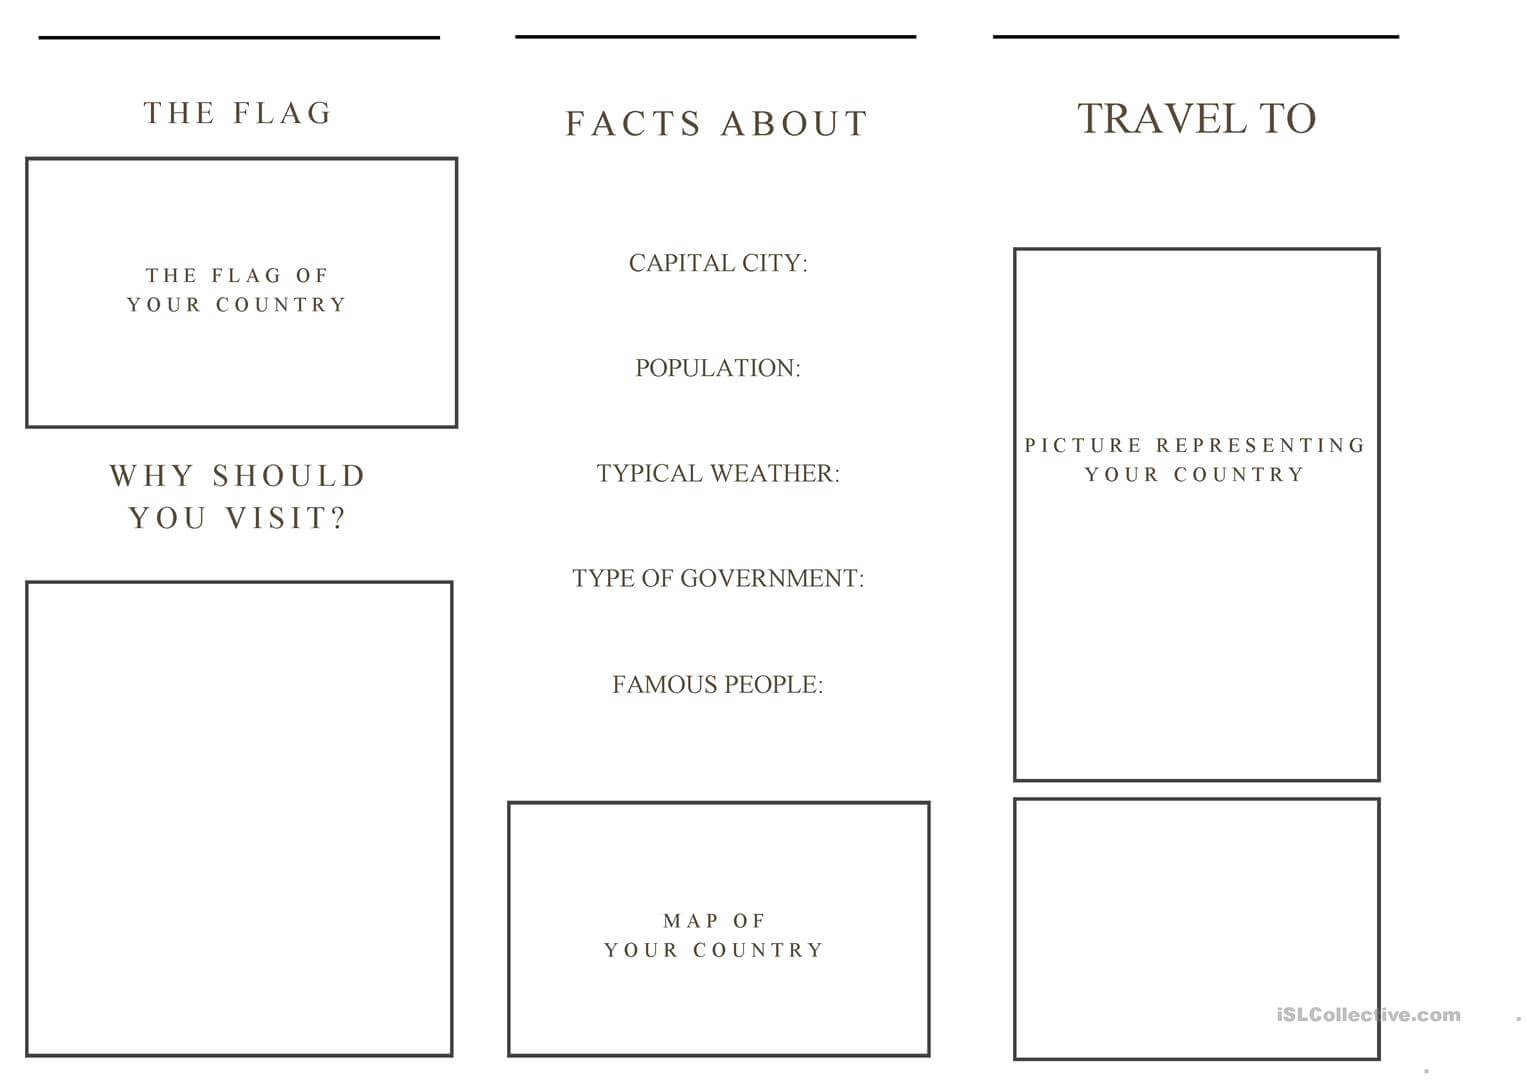 Travel Brochure Template And Example Brochure - English Esl Regarding Travel Brochure Template For Students